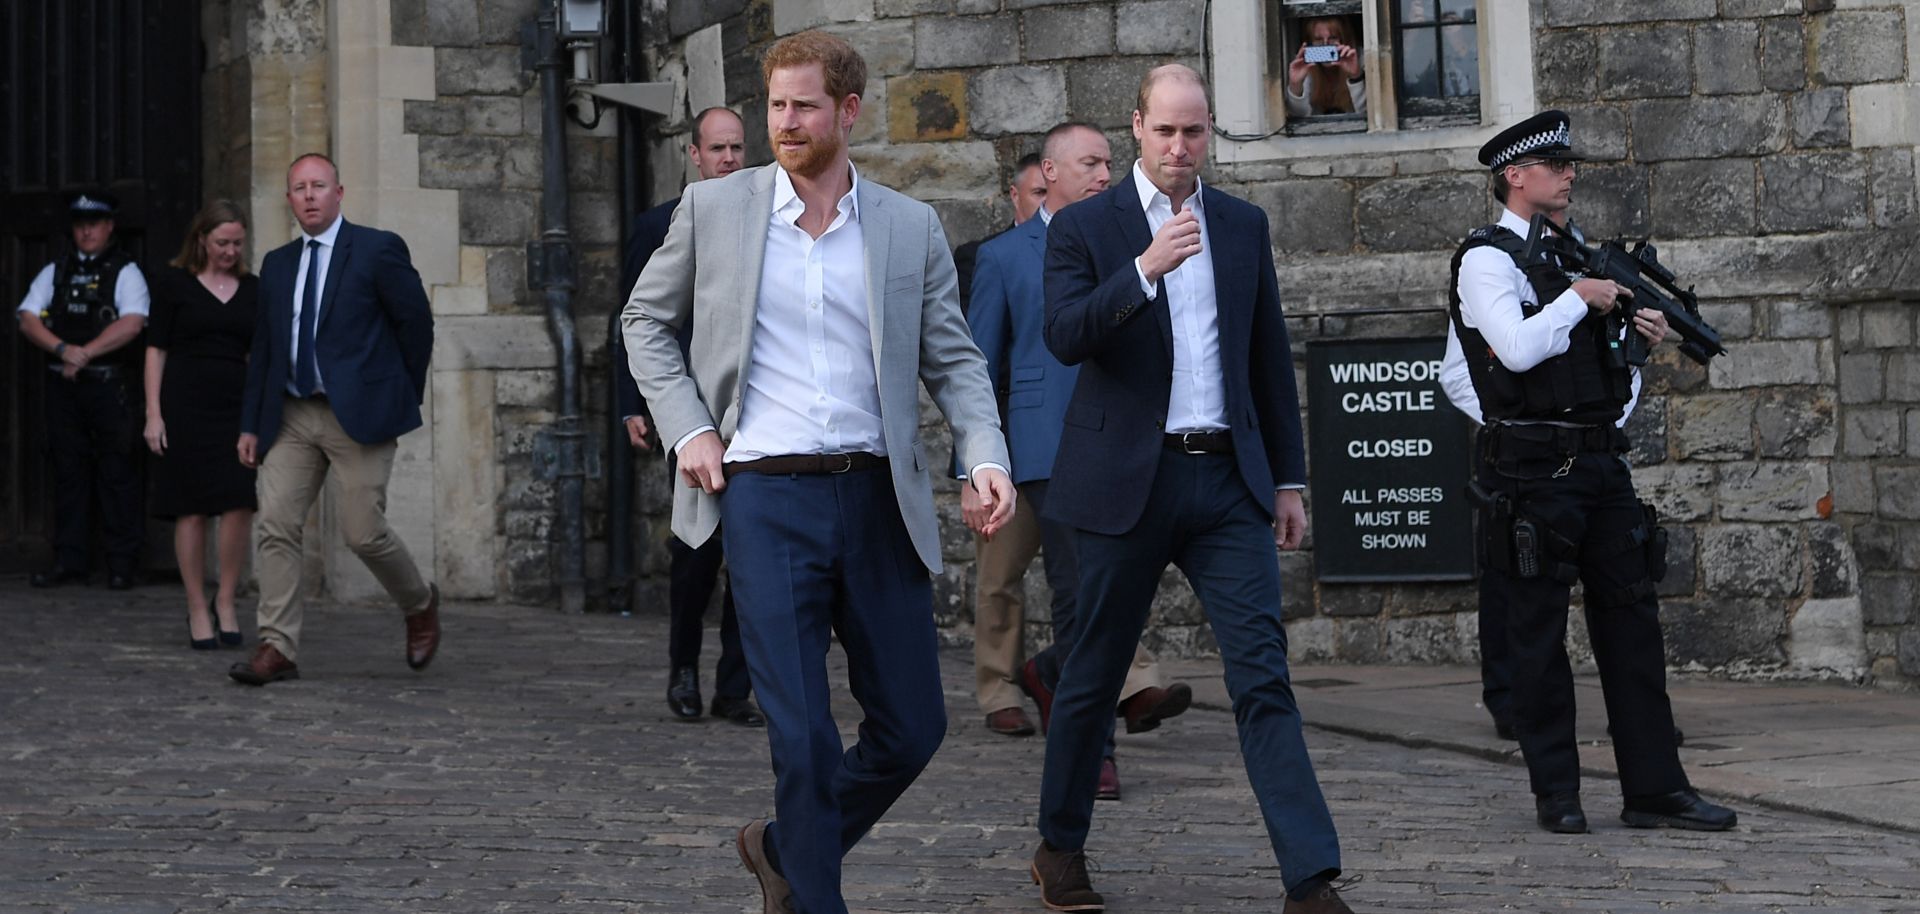 Prince Harry and Prince William, Duke of Cambridge, embark on a walkabout ahead of the royal wedding of Prince Harry and Meghan Markle on May 19, Windsor, England. 